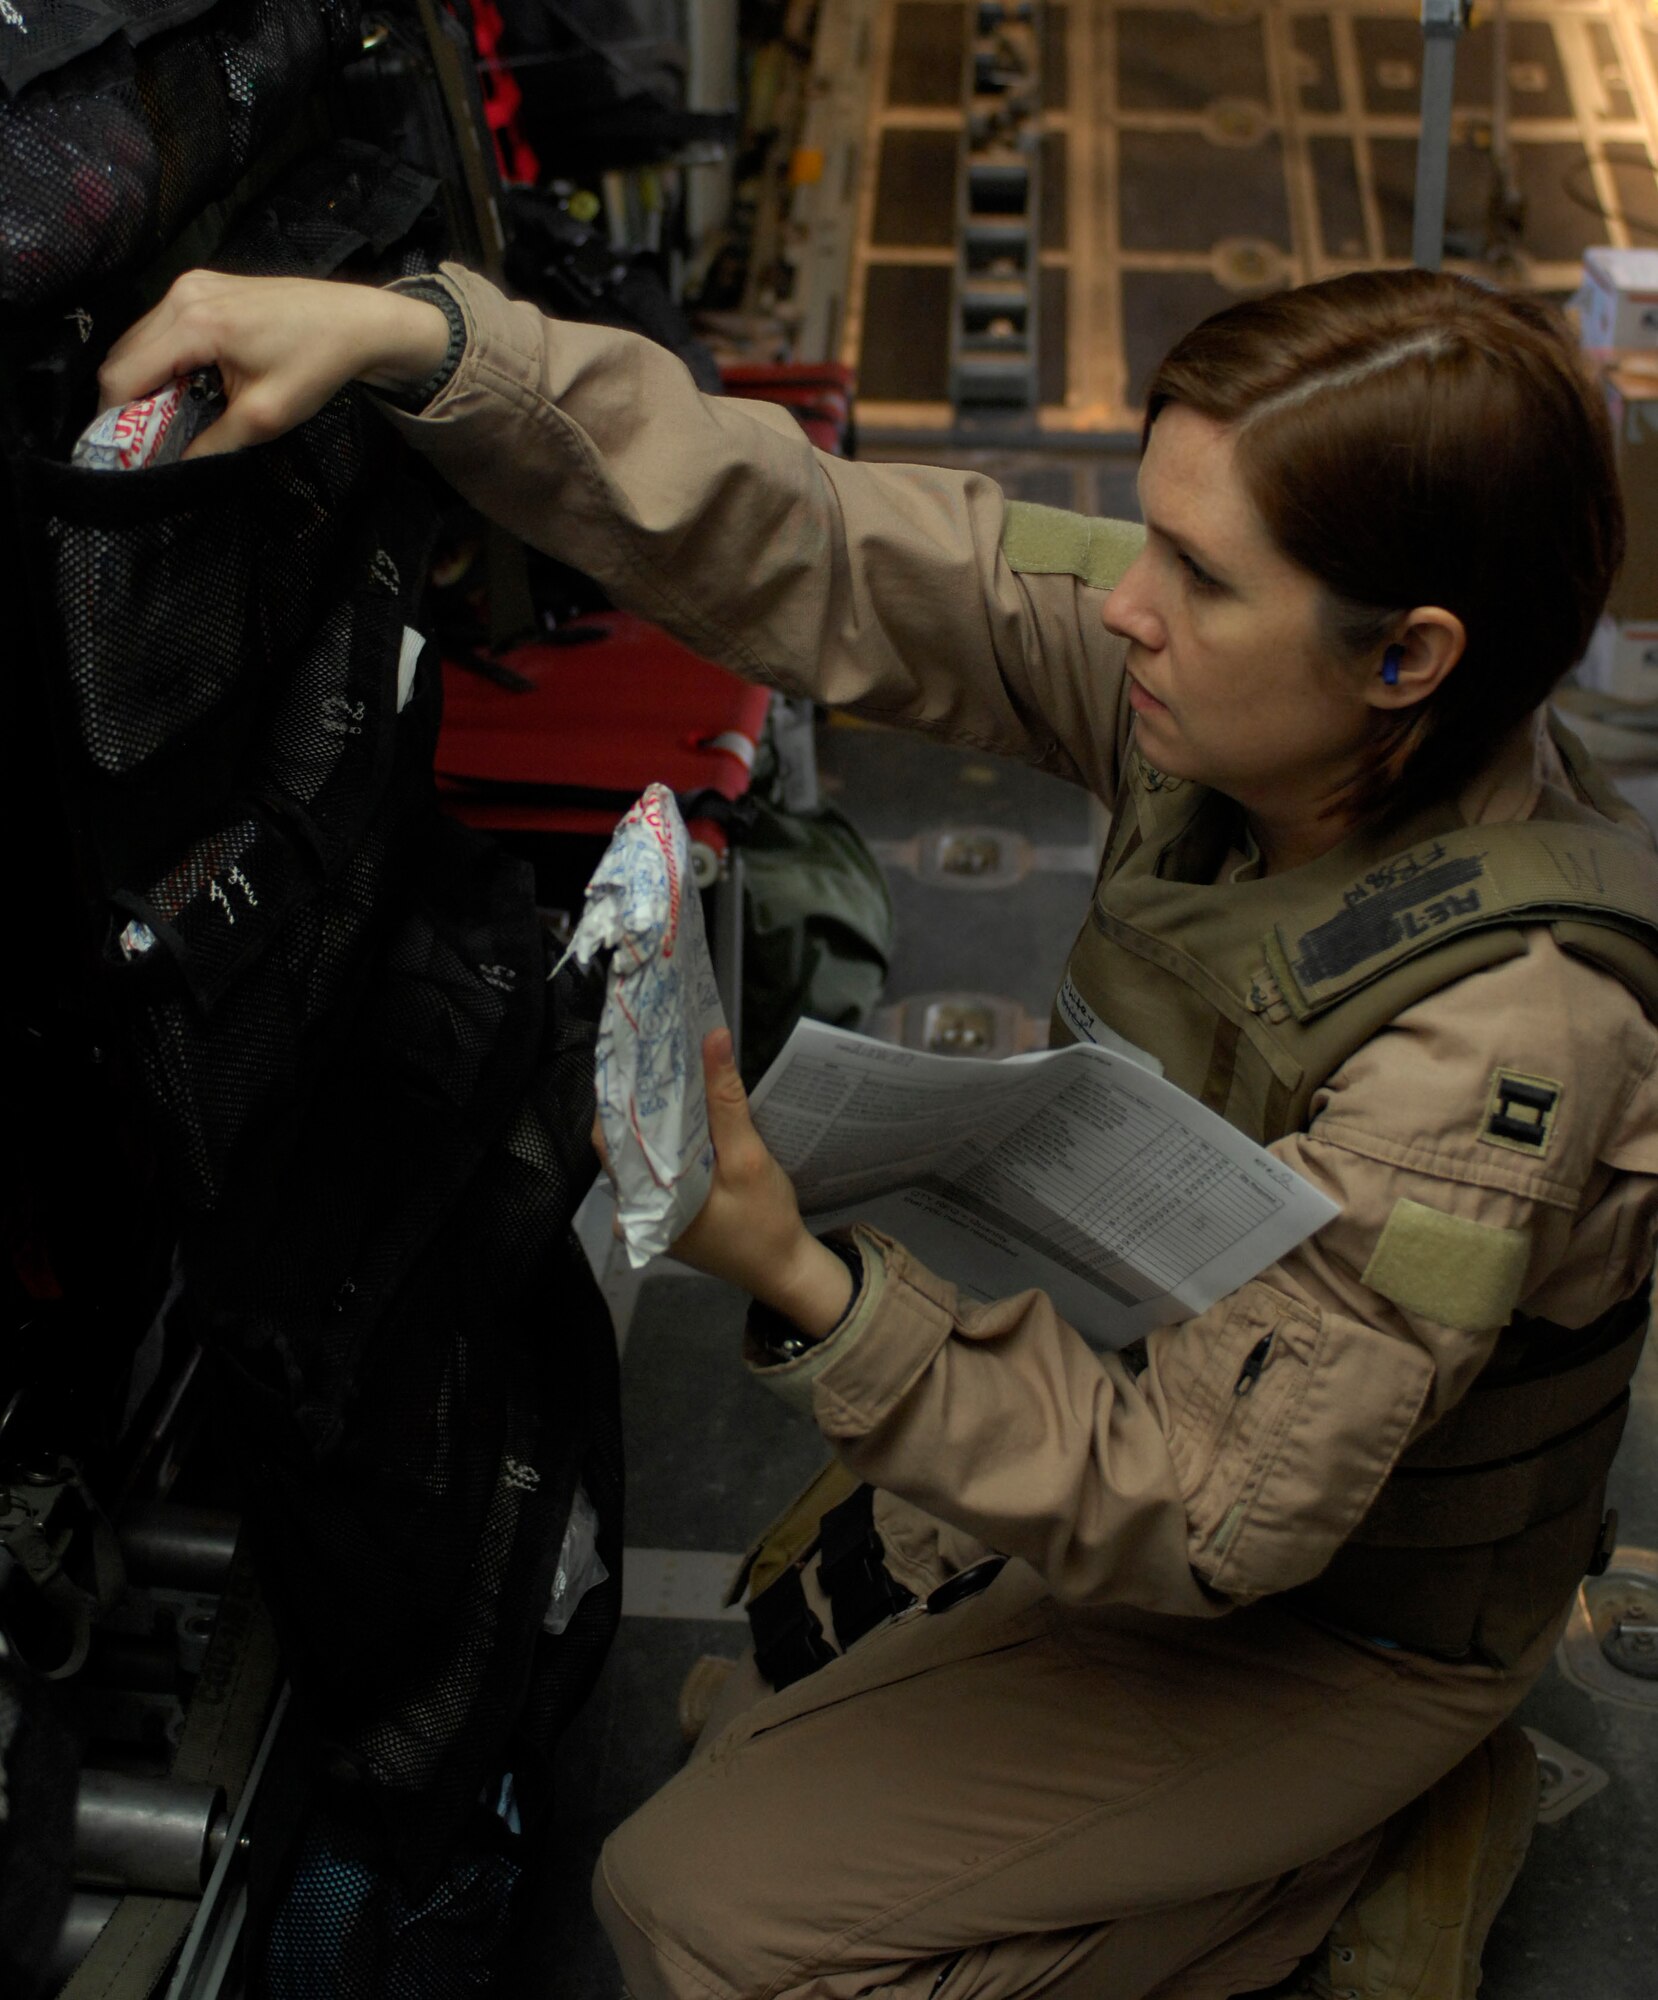 Capt. Susan McCormick, 455th Expeditionary Aeromedical Evacuation Flight, inventories her equipment in flight to Manas Air Base, Krygyzstan, March 26. Captain McCormick prepares for each flight depending on the report given to her by the ground medical team. ?I try to think about the worst, but really we have no idea what the patient will look like when they arrive,? said Captain McCormick. She is deployed from Westover Air Reserve Base, Mass. (U.S. Air Force photo/ Senior Airman Erik Cardenas)(Released)